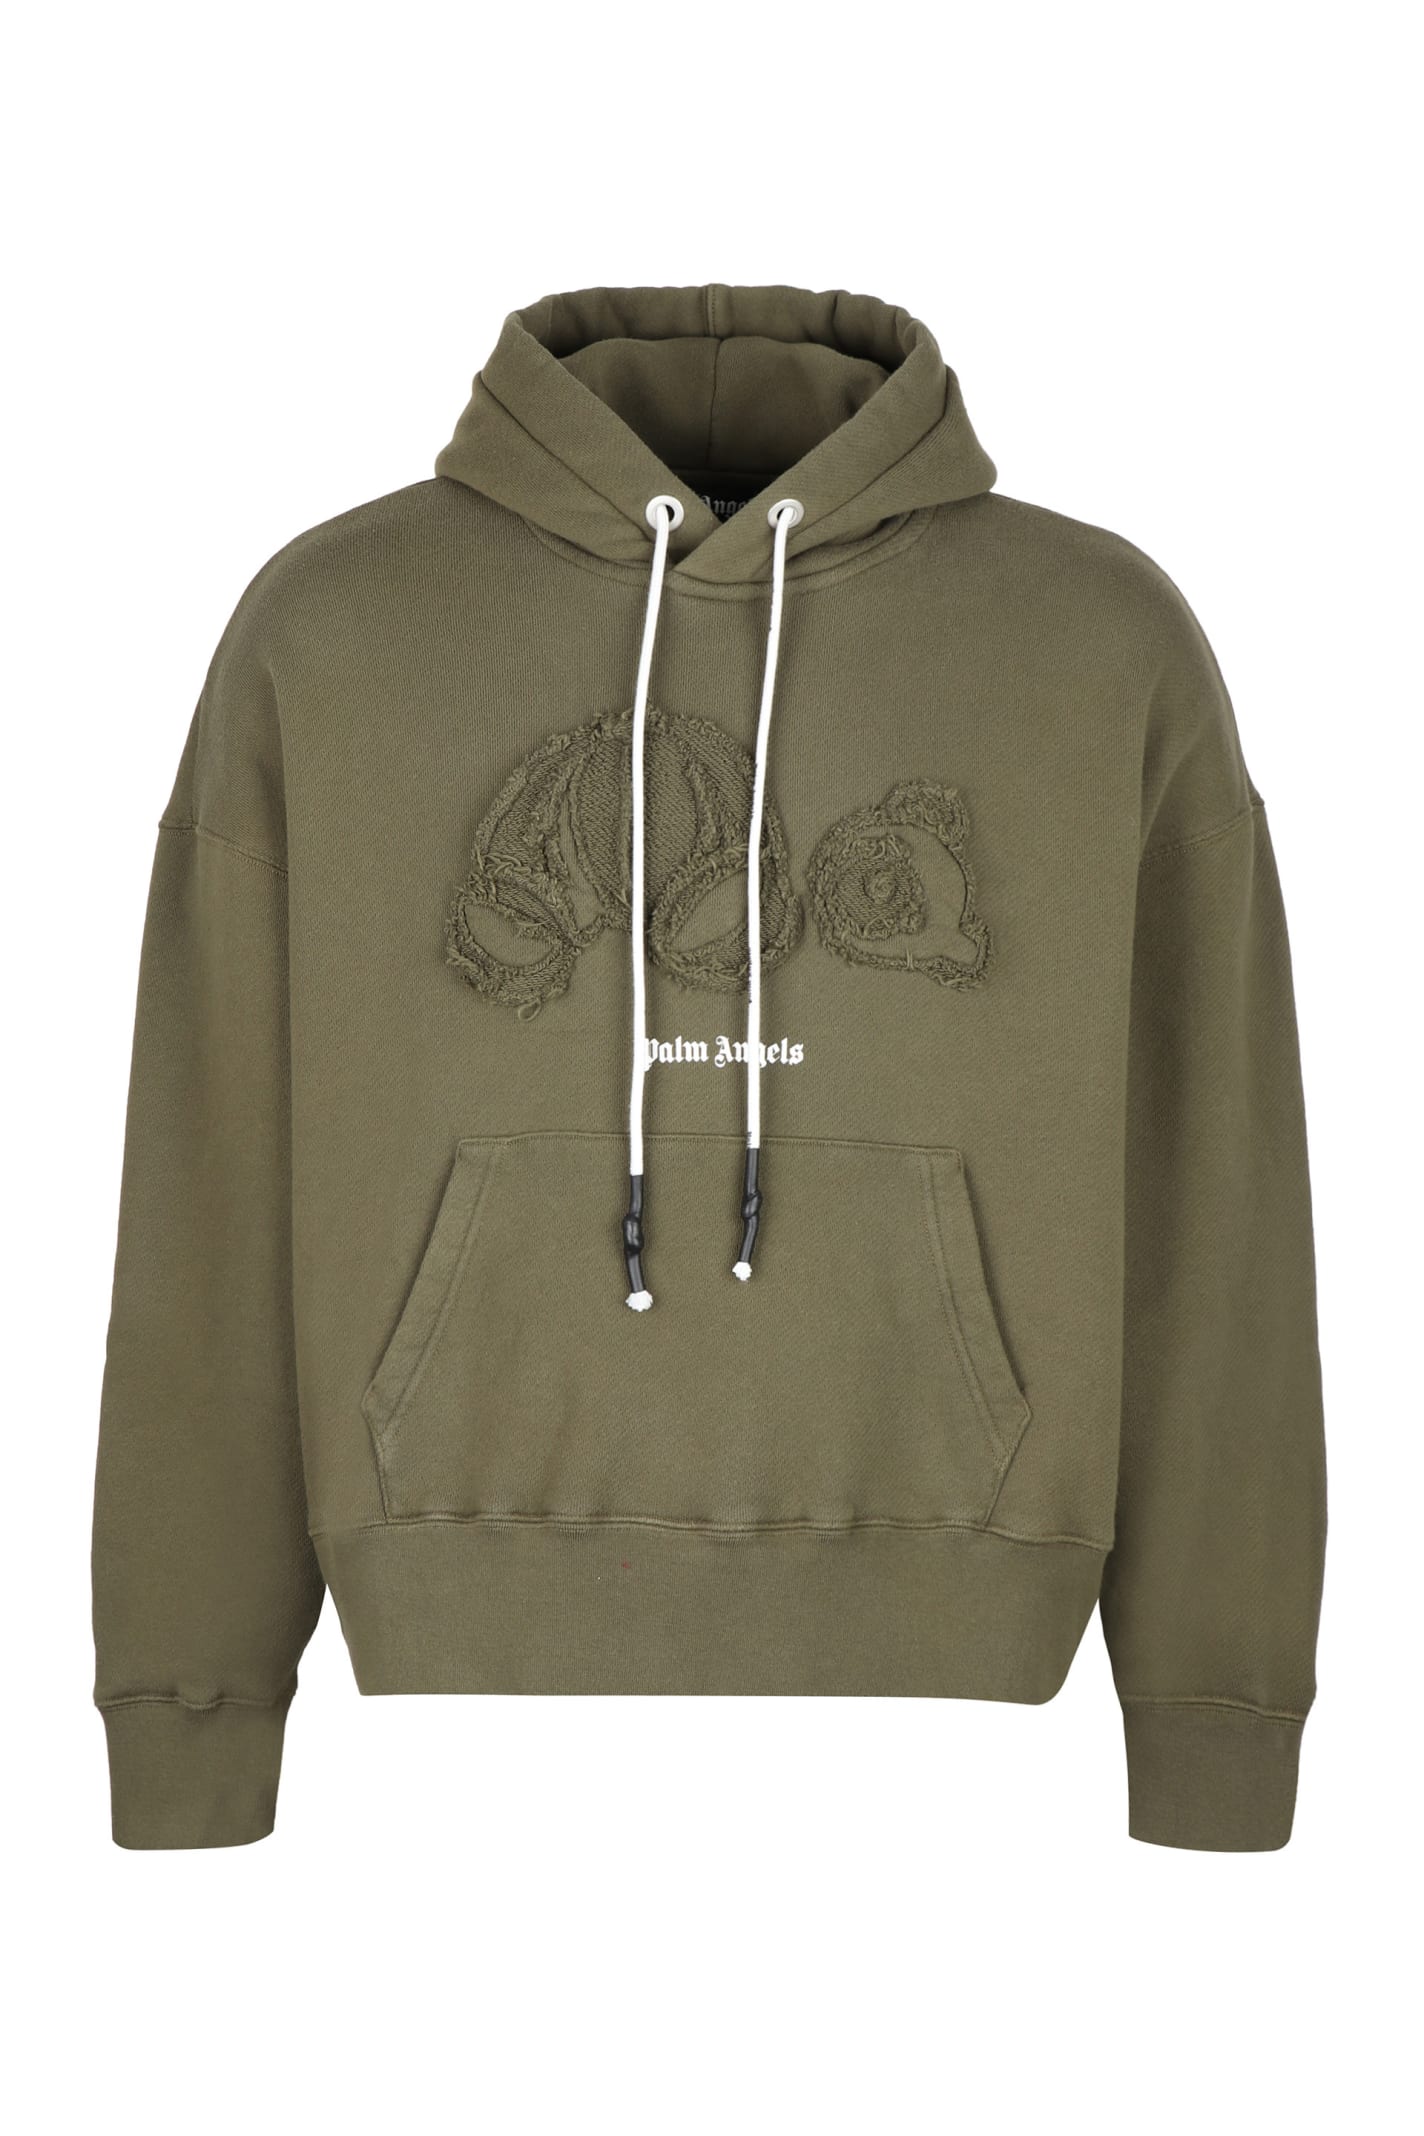 Palm Angels Clothing COTTON HOODIE